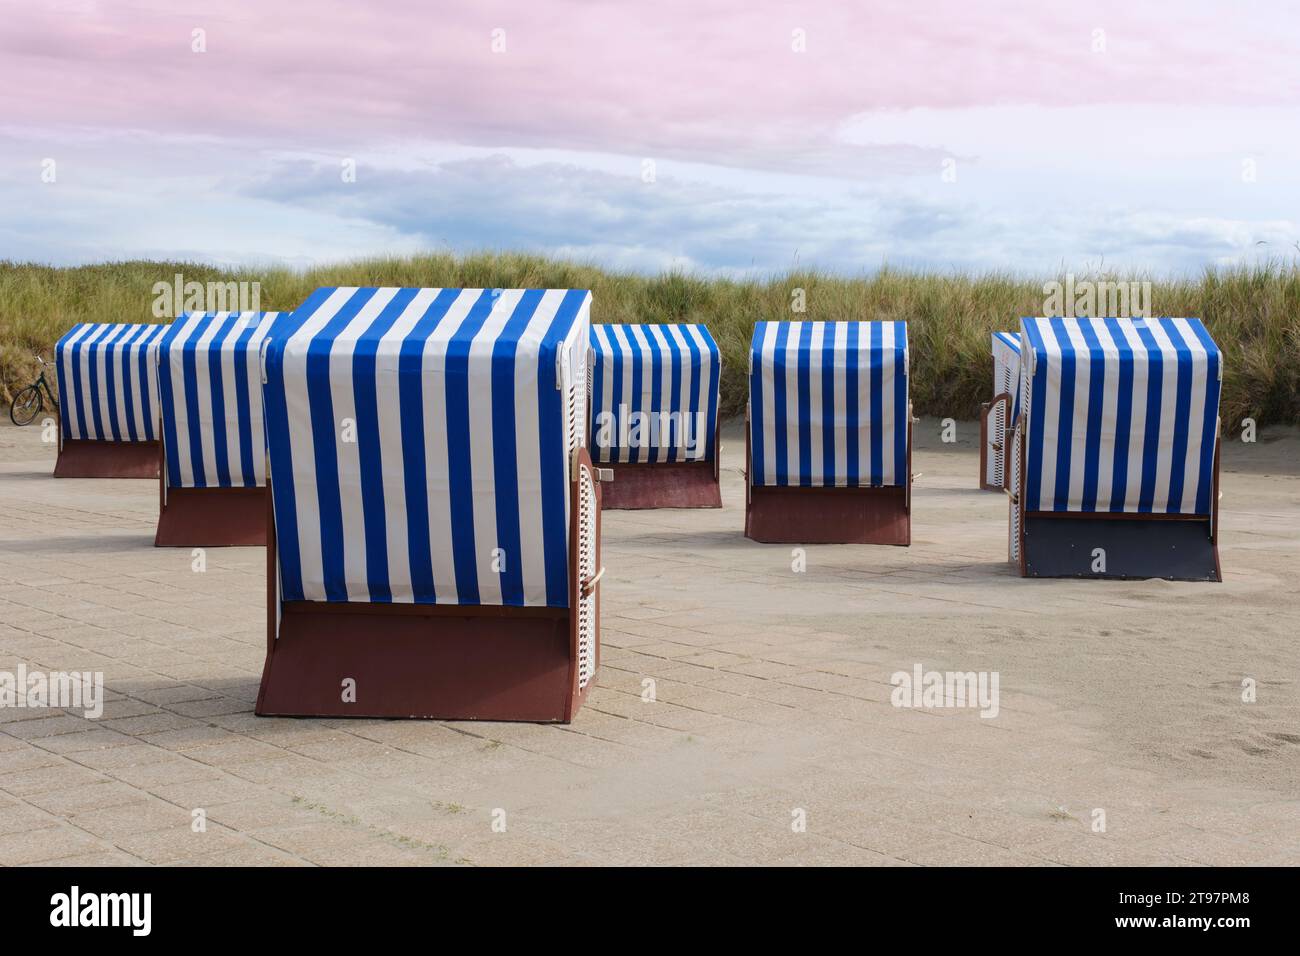 Germany, Lower Saxony, Hooded beach chairs on paved promenade on Norderney island Stock Photo